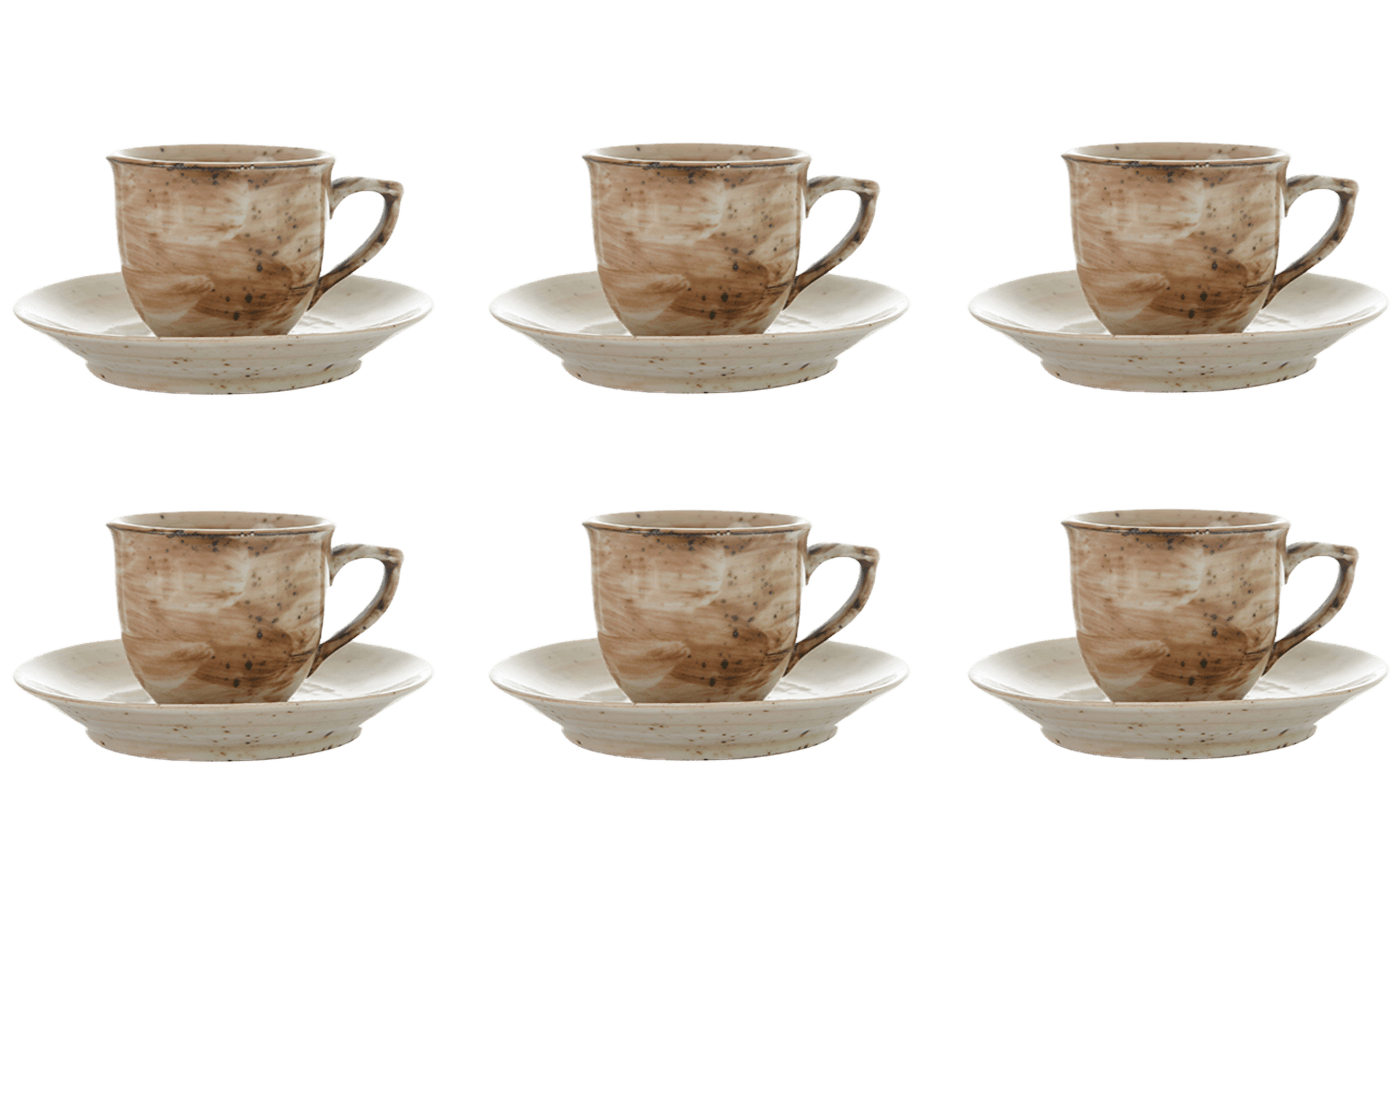 Senzo - Plume - Coffee Cup Set 6 Pieces with Saucer - Beige - Porcelain - 165ml - 520001165x6